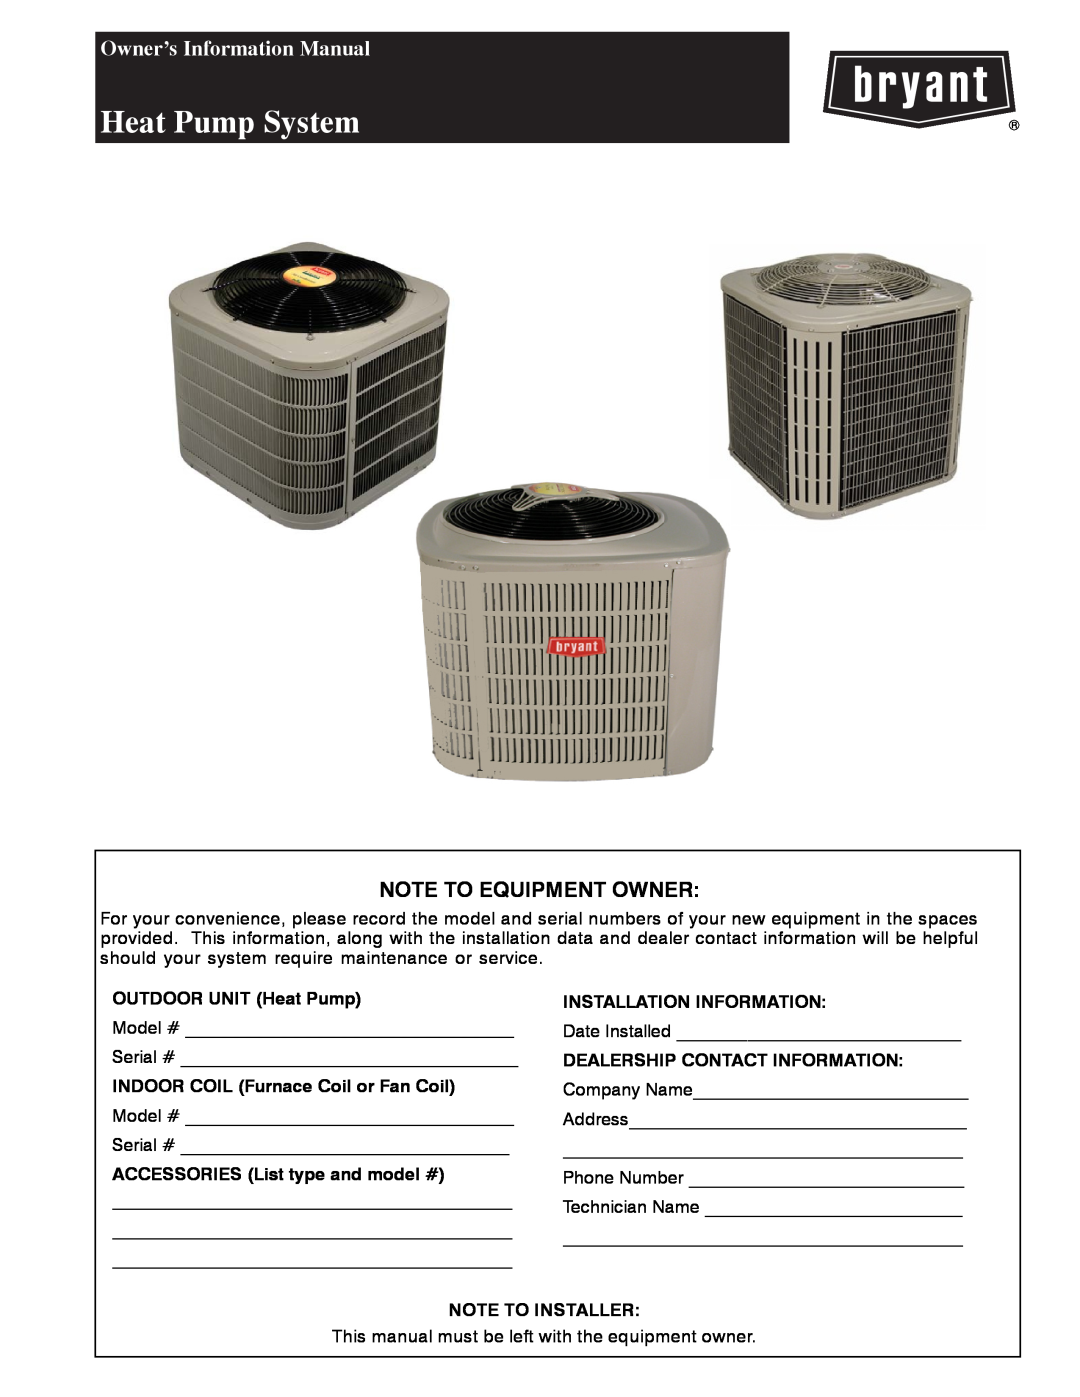 Bryant Central Air Conditioning System manual Heat Pump System, Owner’s Information Manual, Note To Equipment Owner 